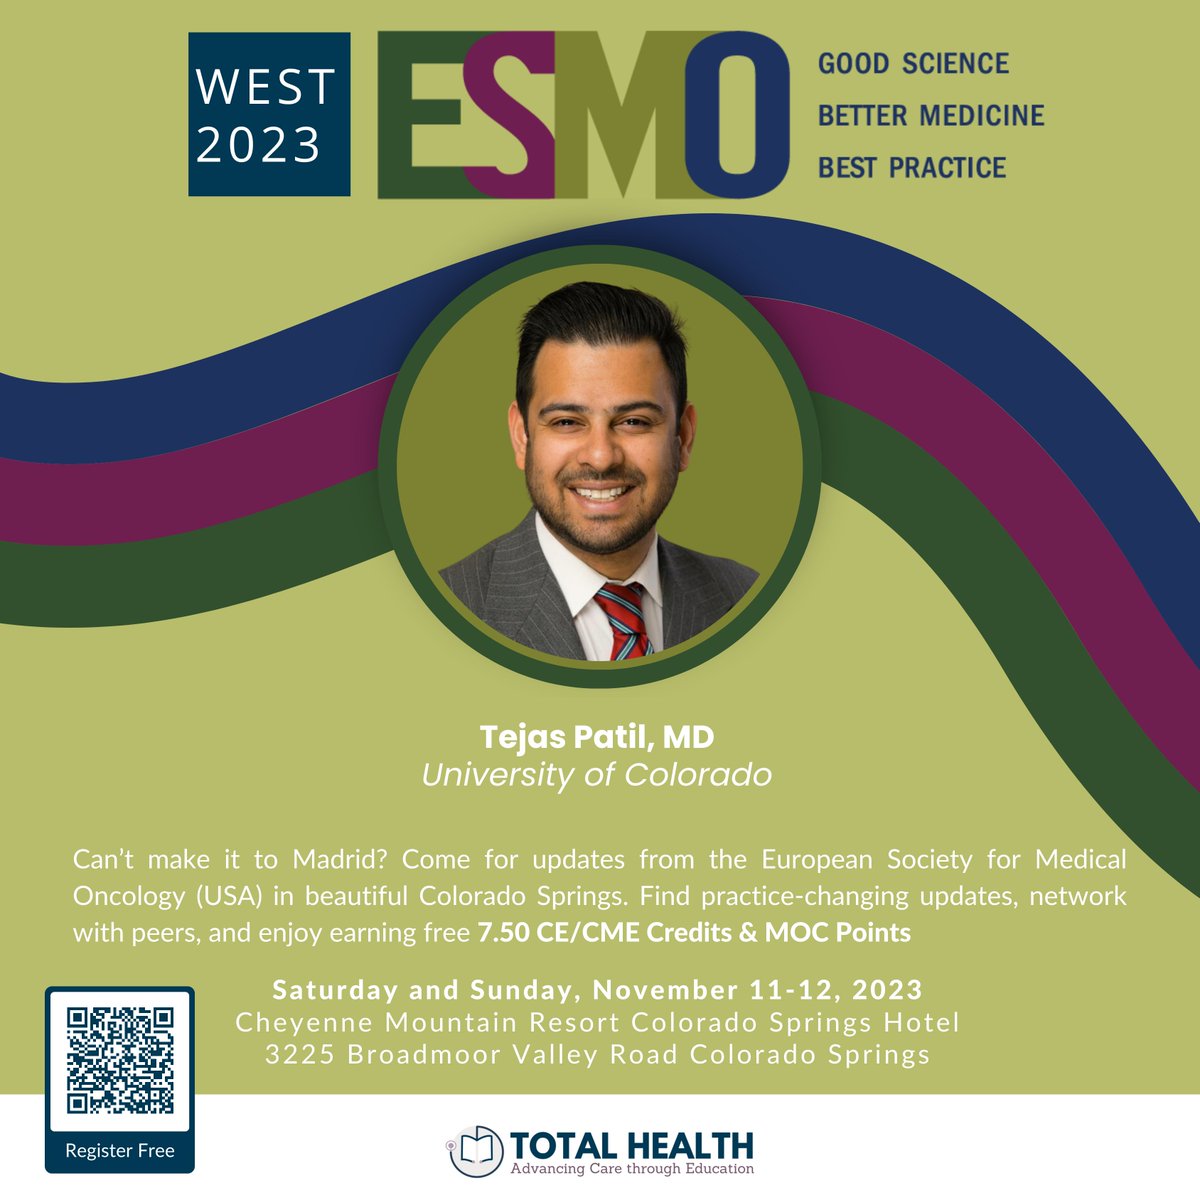 Join me as I share @myESMO  updates on #NSCLC at the upcoming 2023 ESMO West Conference! 

This meeting will be held at the Cheyenne Moutain Resort in Colorado Springs on November 11th - 12th!

Register Free Today: totalhealthoncology.com/esmowest'